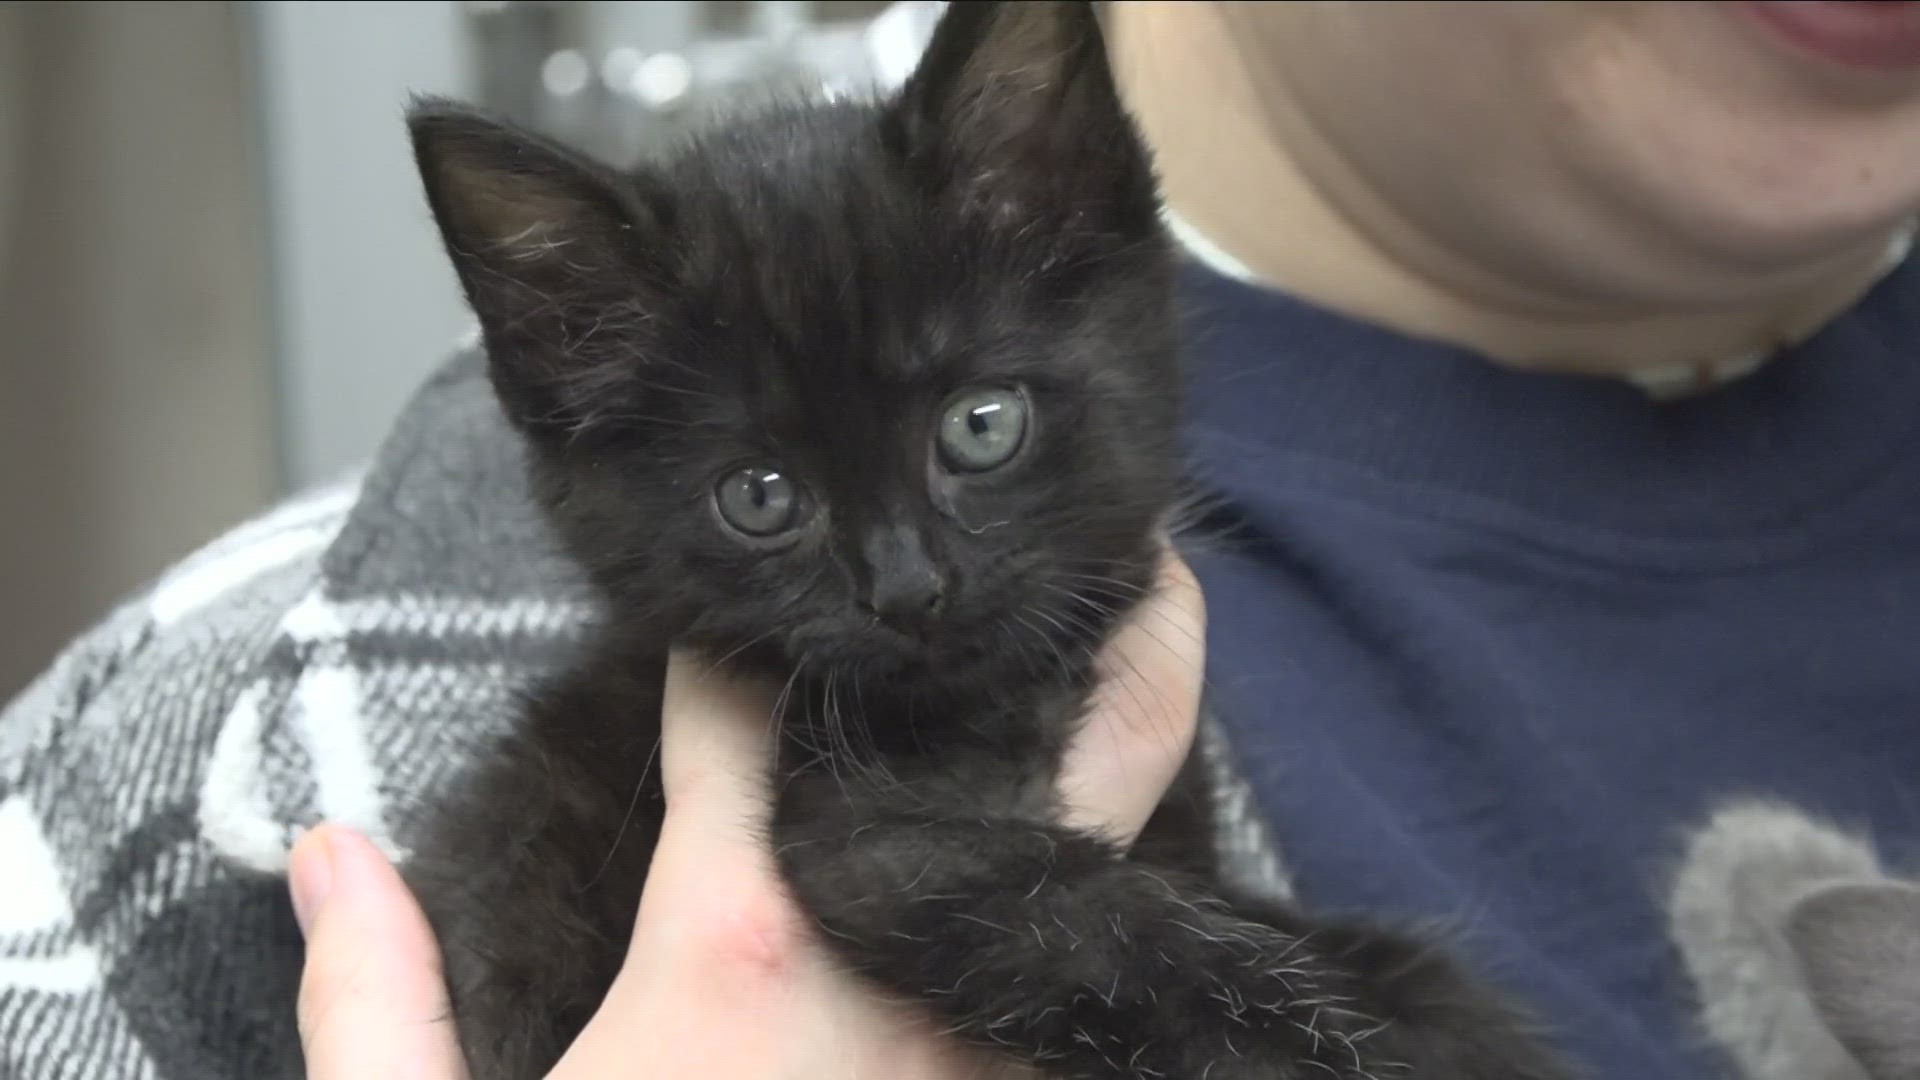 The organization is expecting hundreds of cats and kittens during the season is putting out a plea for foster homes.